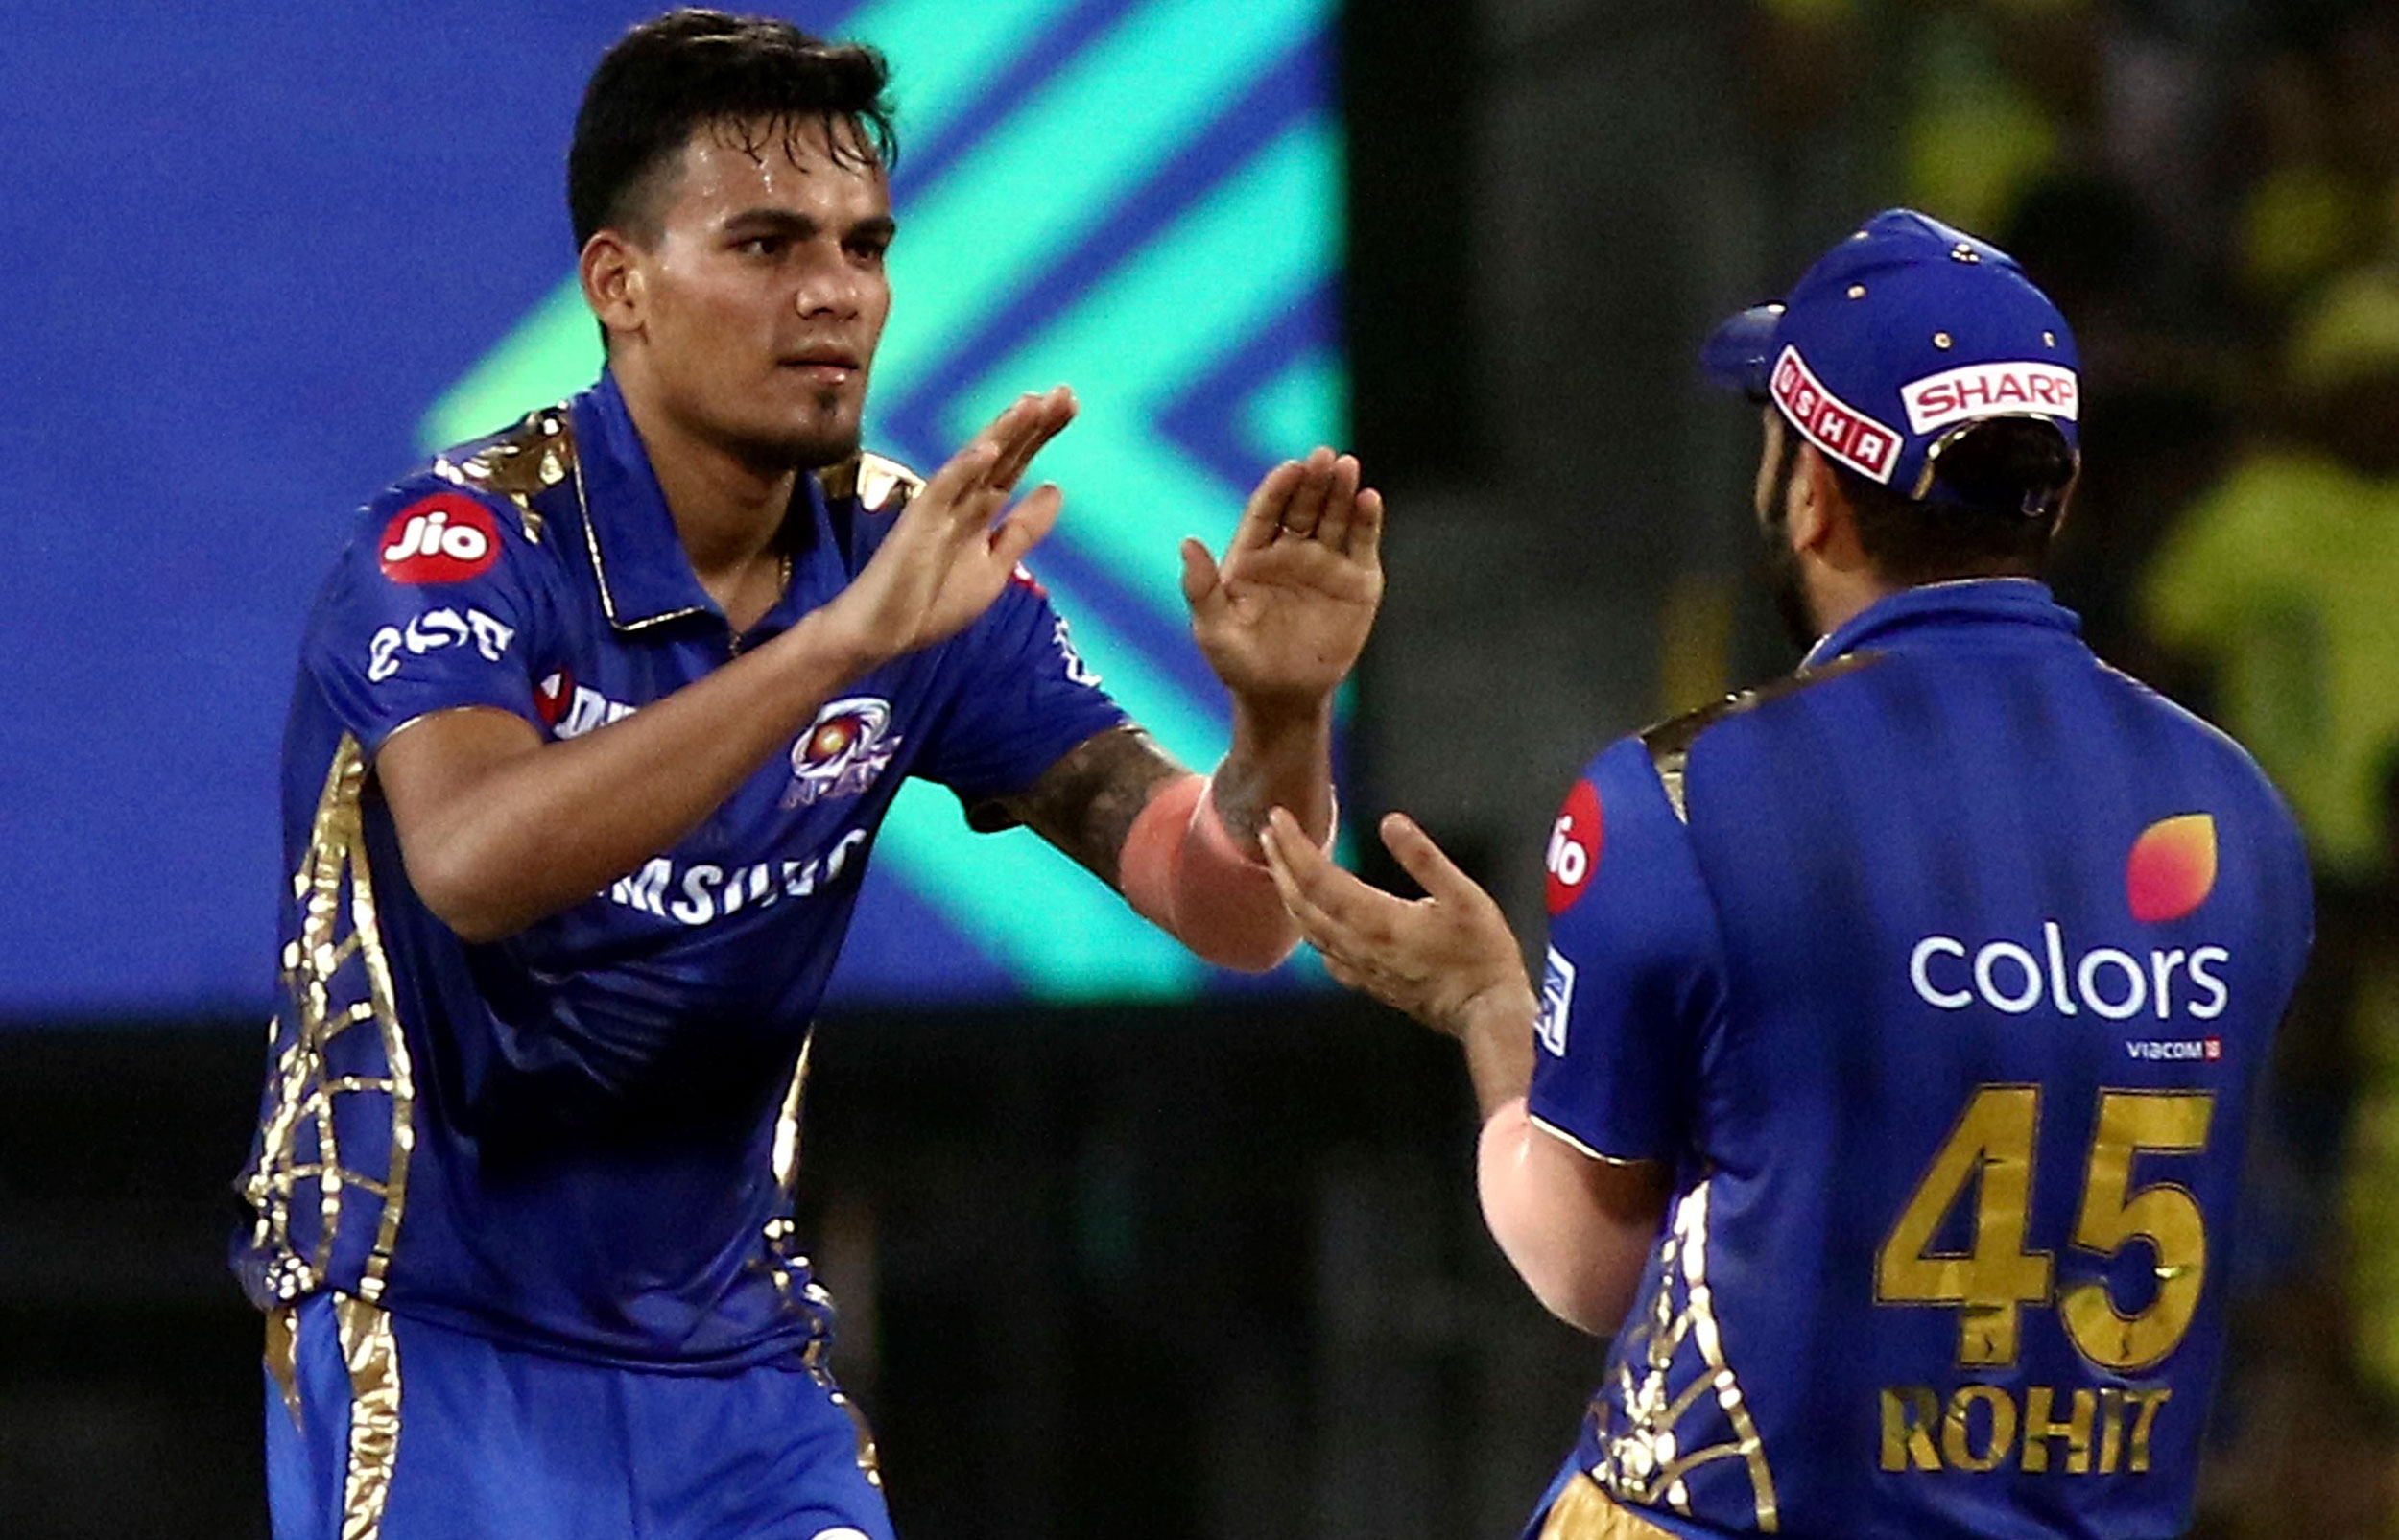 Rahul Chahar and Rohit Sharma of Mumbai Indians celebrate after taking Murali Vijay's wicket during the qualifier match of IPL in Chennai, on May 7, 2019. 